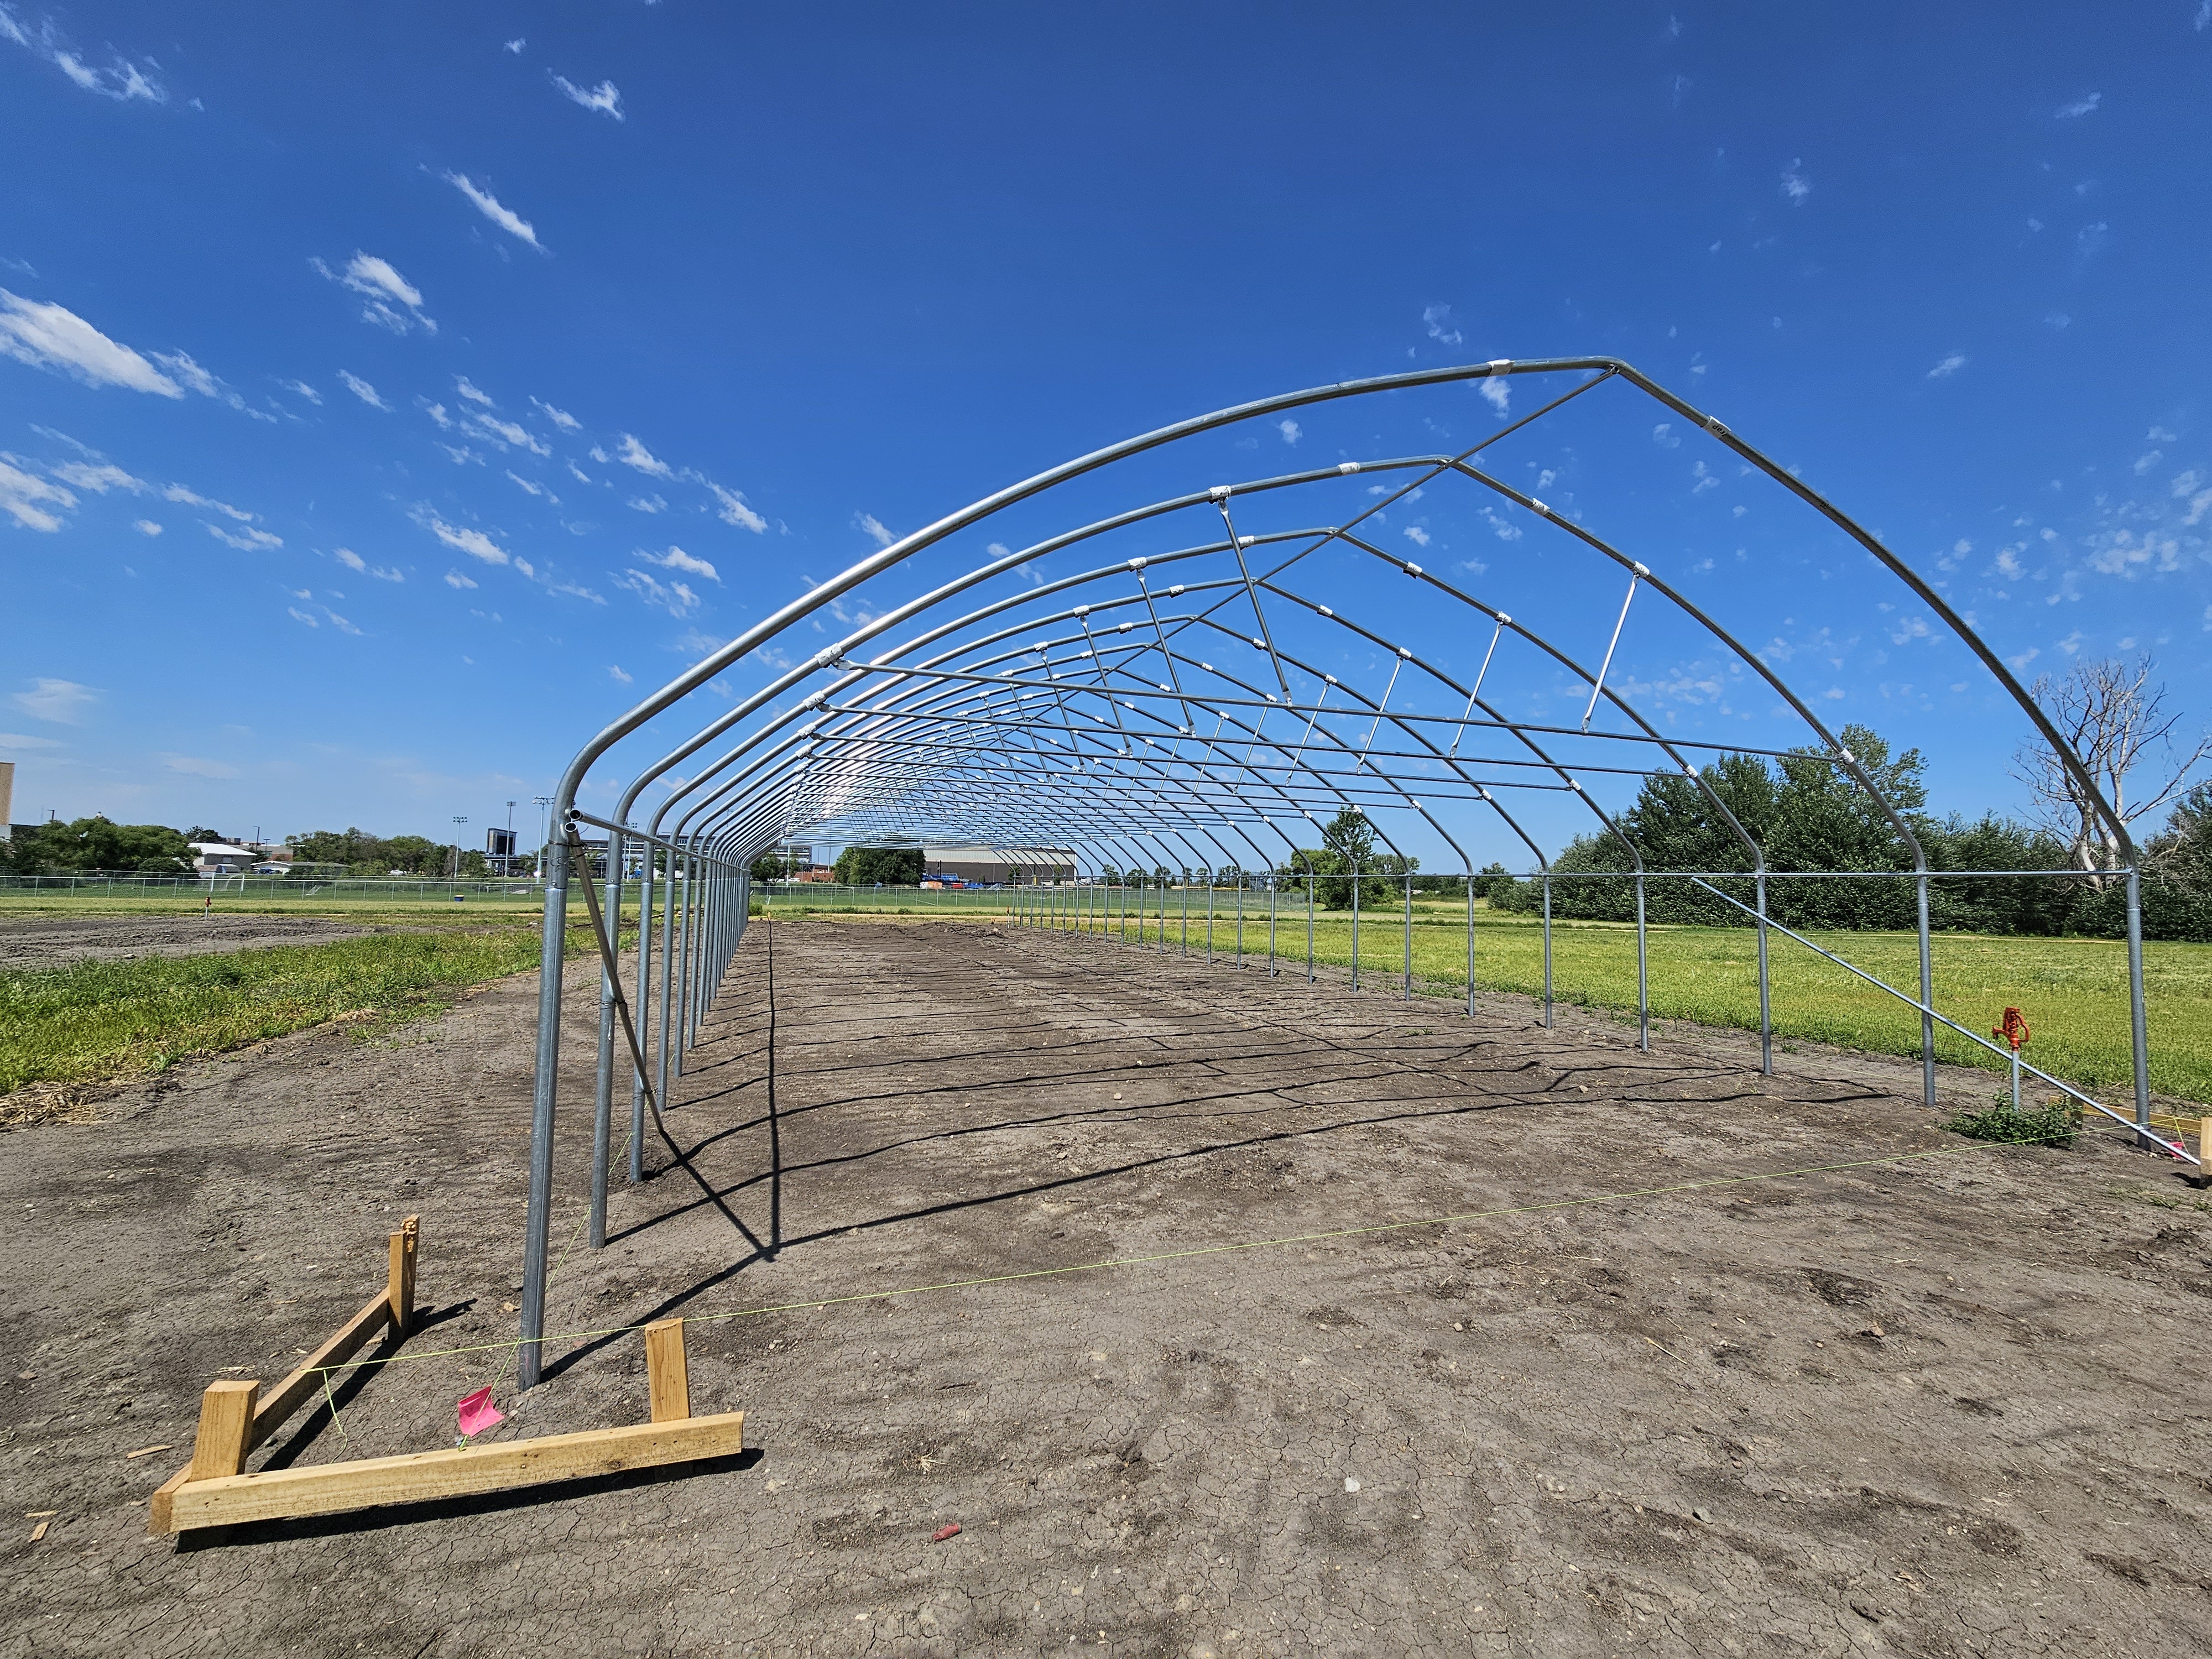 The metal frame of a high tunnel stands on a plot of bare dirt